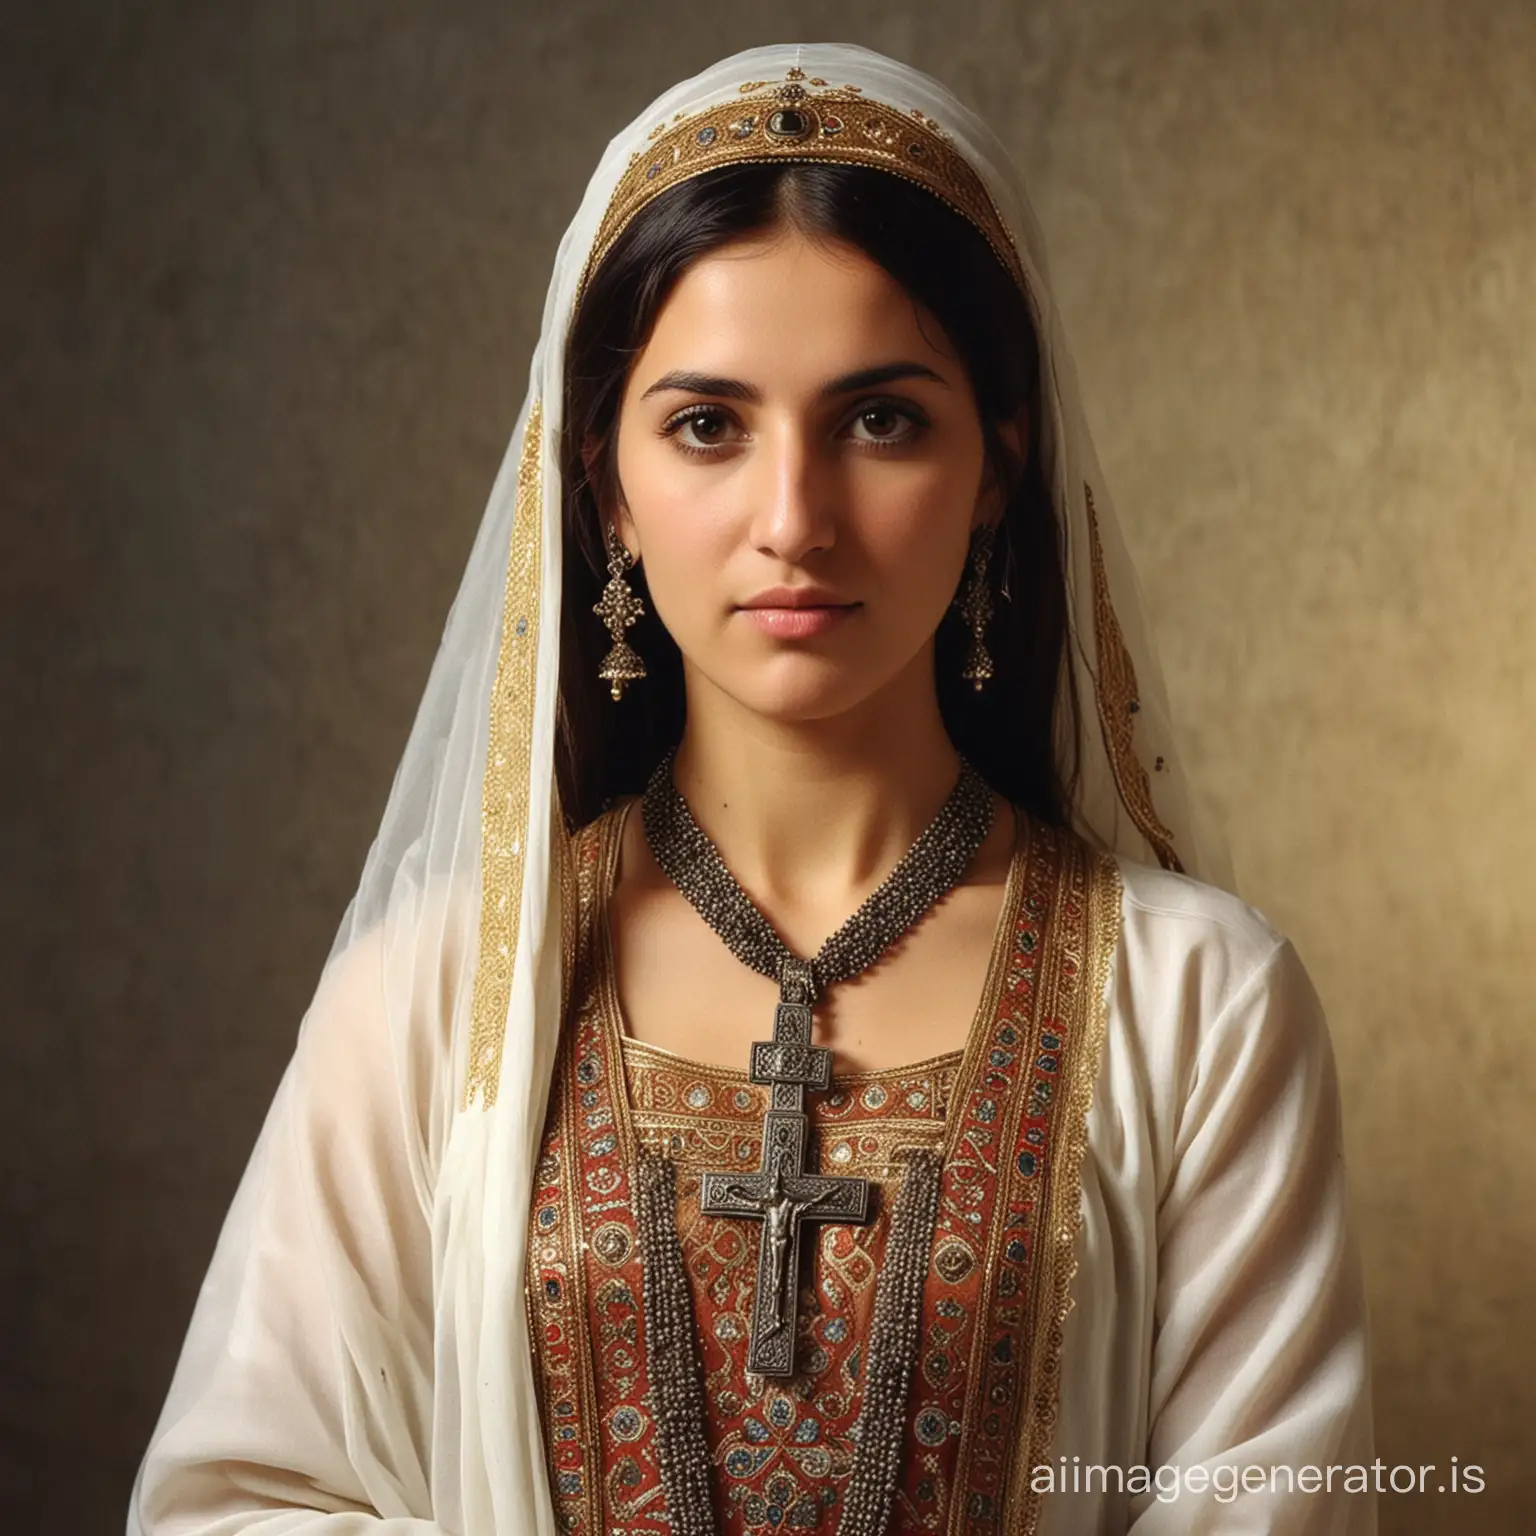 Katranide wife of Gagik Bagratuni 970-1025 year around  his neck was a necklace with a cross and simple dress the veil on the head  she christian and sponsored the construction of the temple of Ani armenian